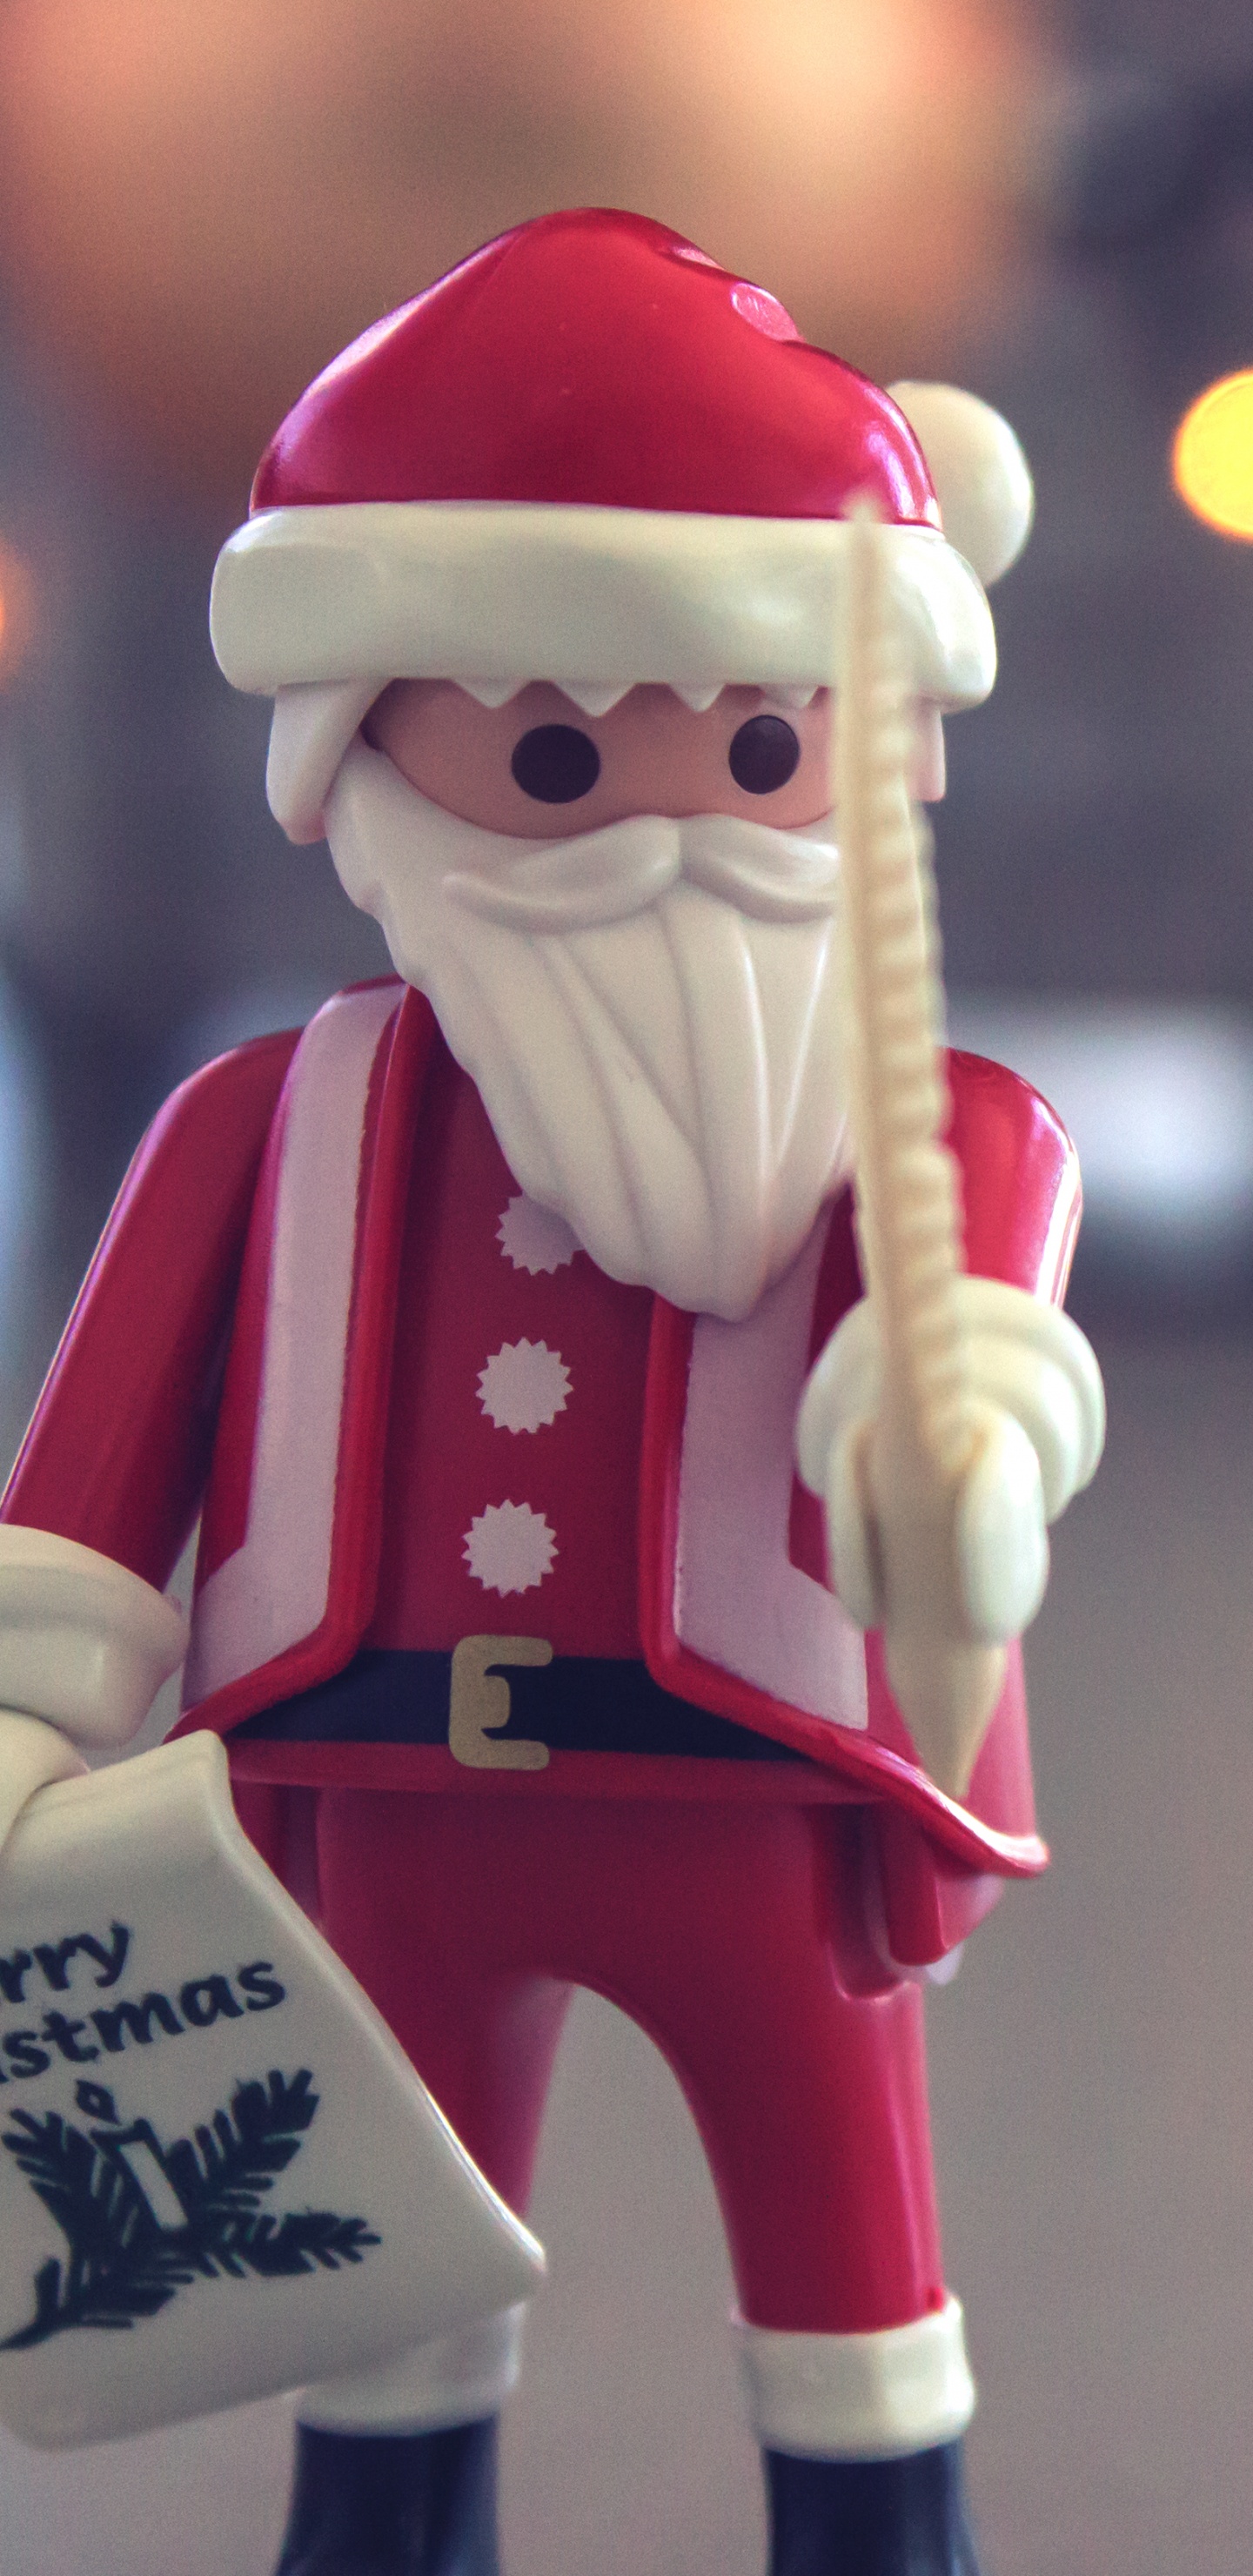 Santa Claus, Christmas Day, Figurine, Toy, Christmas. Wallpaper in 1440x2960 Resolution